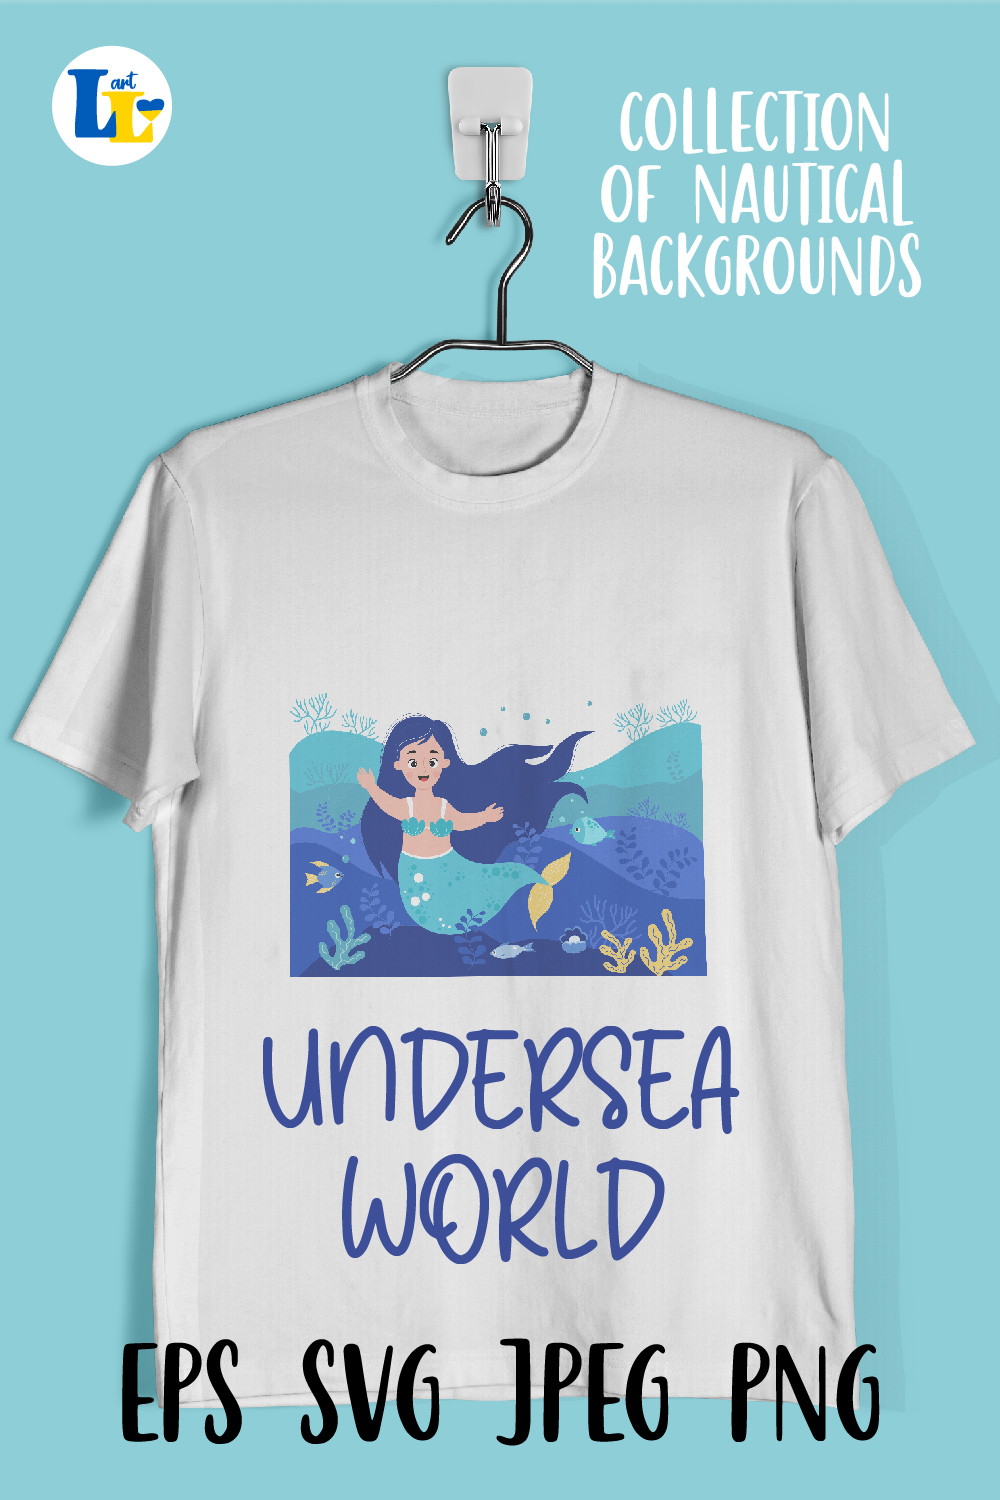 Sea Backgrounds, Postcards with Mermaid, Whale and Underwater World t-shirt.